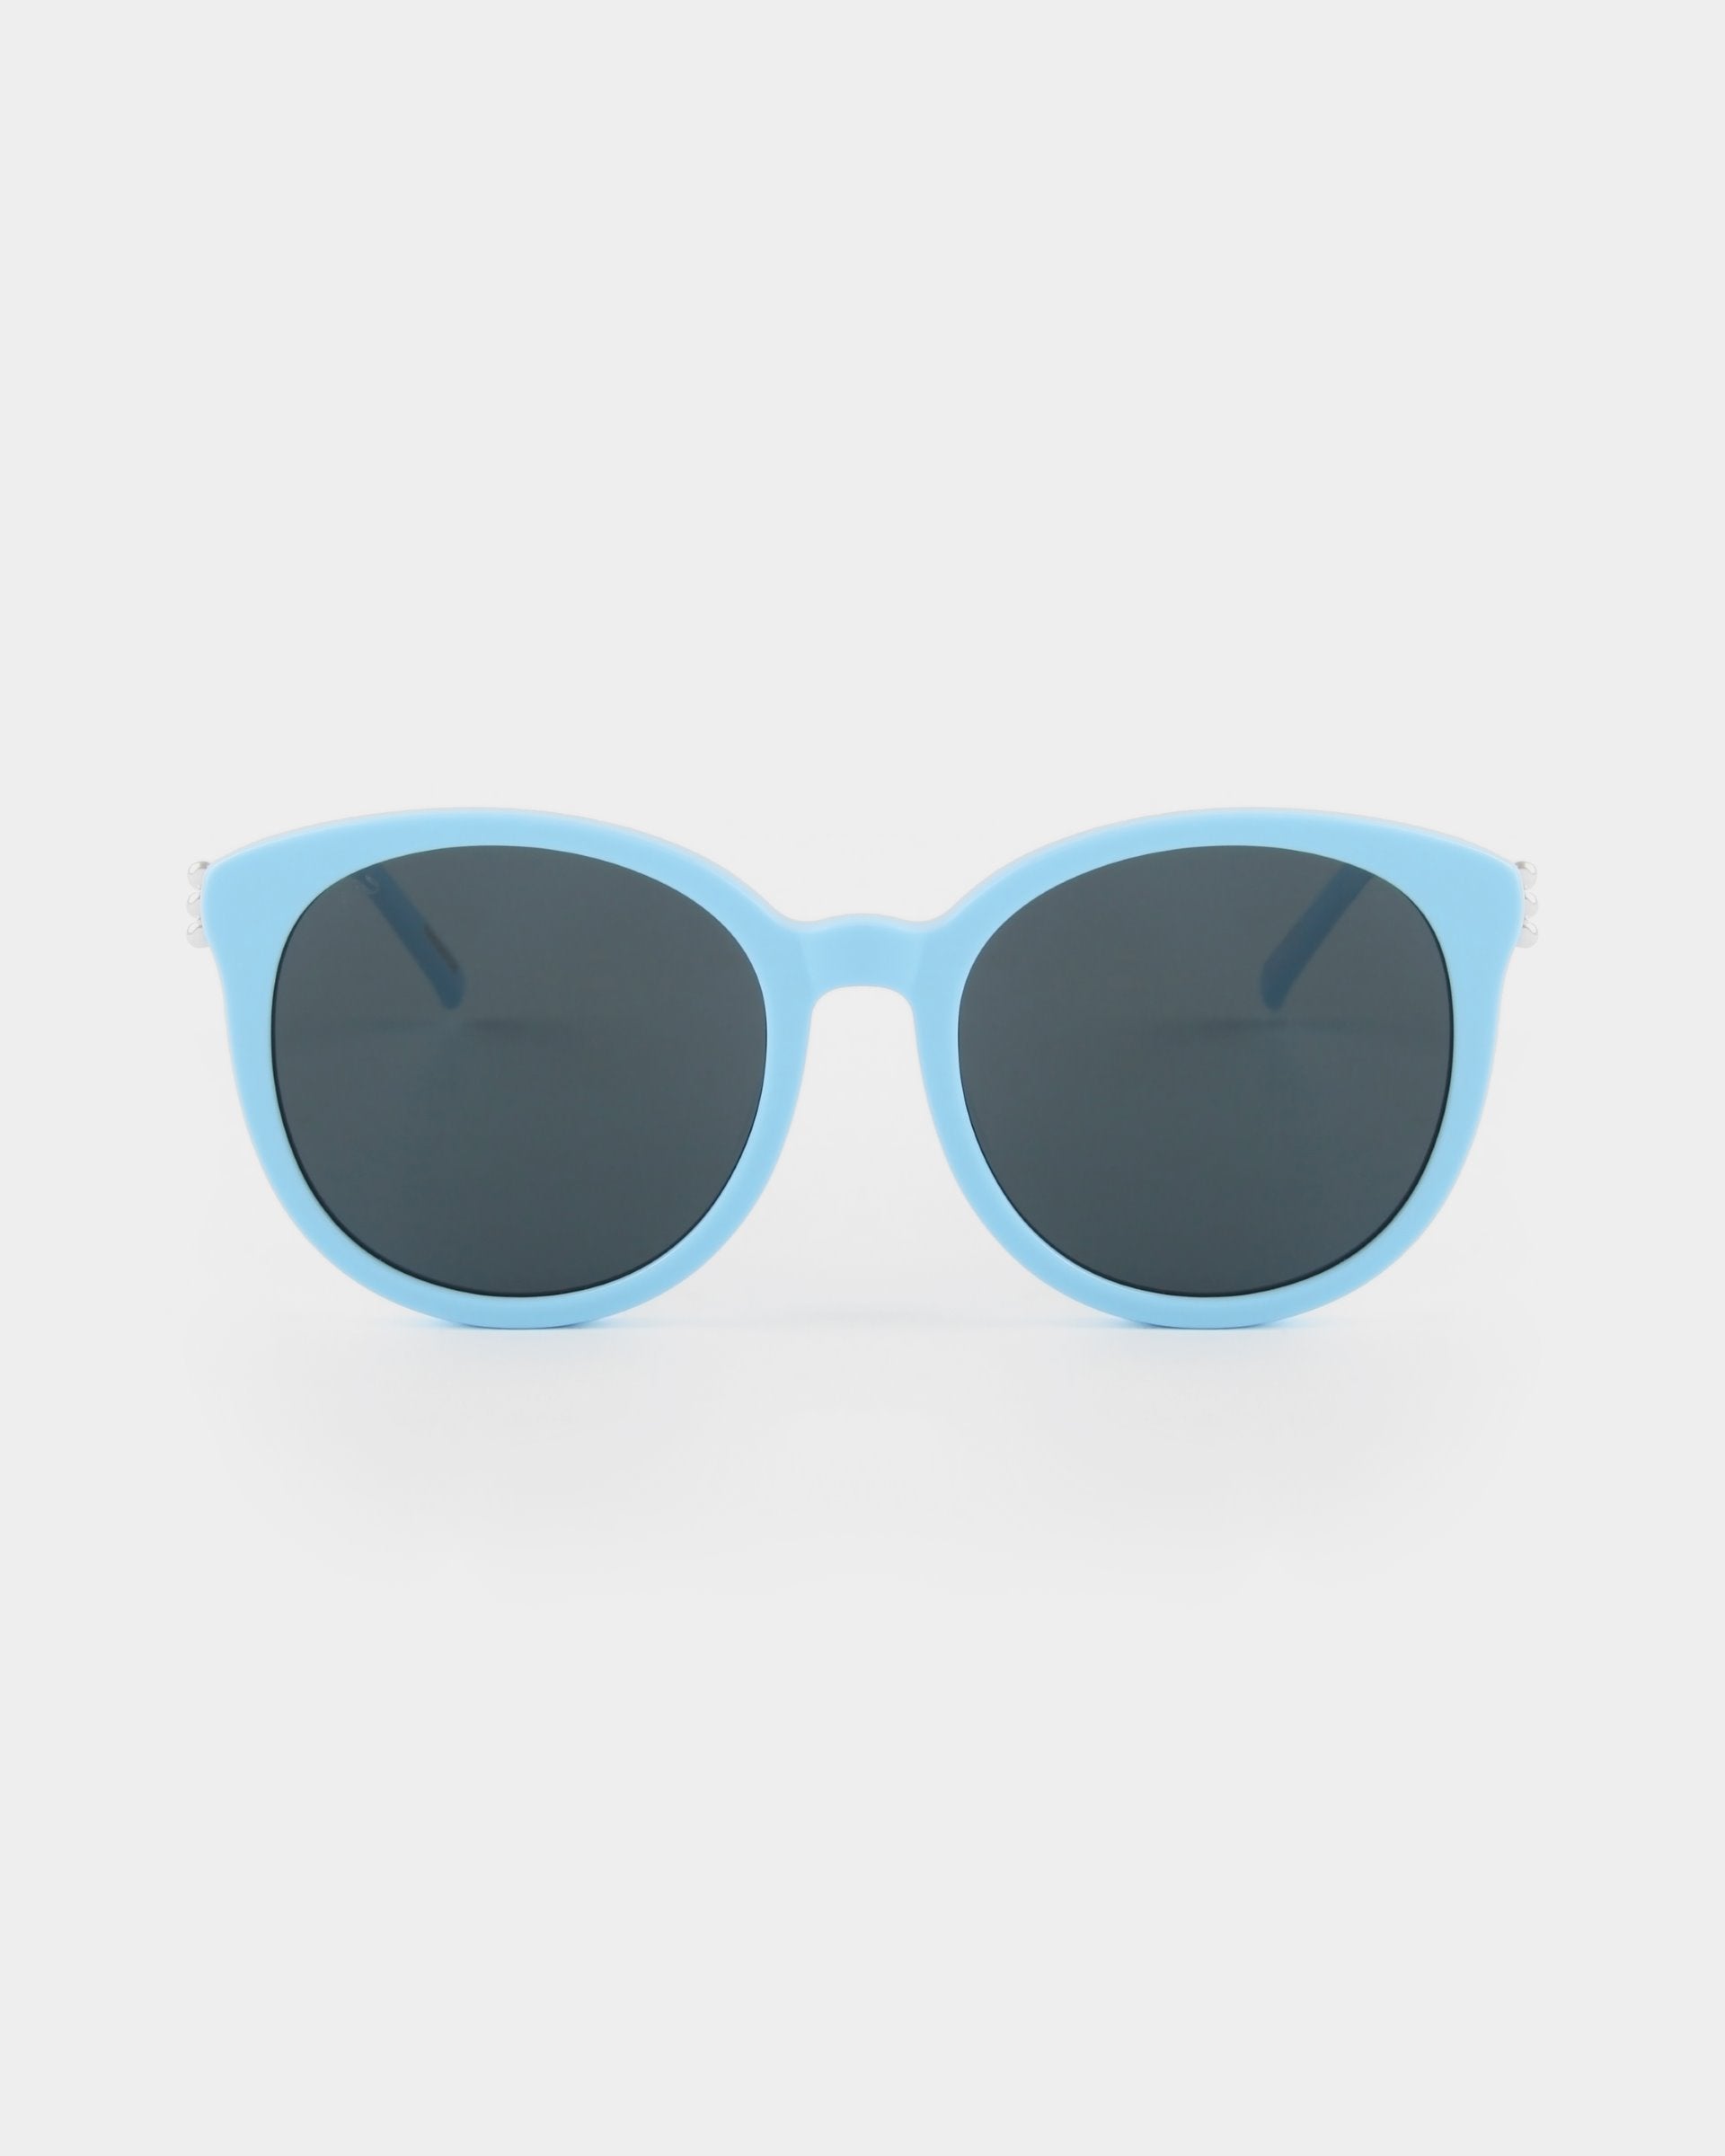 A pair of stylish Scarlett sunglasses by For Art&#39;s Sake® with shatter-resistant nylon lenses that are dark and oval-shaped, displayed against a plain white background.